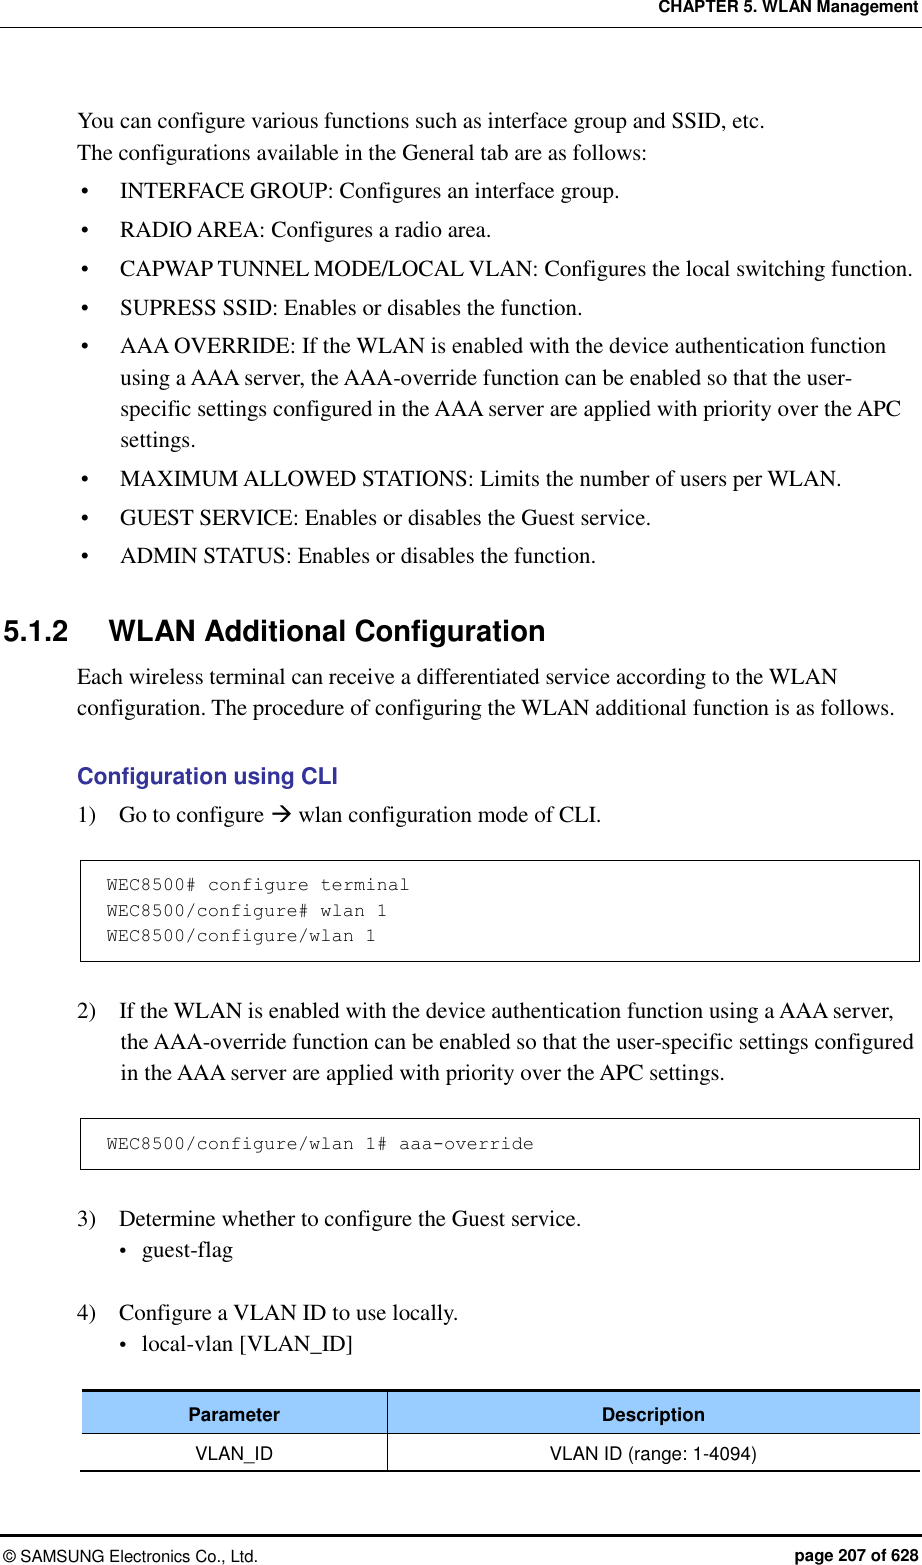 CHAPTER 5. WLAN Management ©  SAMSUNG Electronics Co., Ltd.  page 207 of 628 You can configure various functions such as interface group and SSID, etc.   The configurations available in the General tab are as follows:  INTERFACE GROUP: Configures an interface group.  RADIO AREA: Configures a radio area.  CAPWAP TUNNEL MODE/LOCAL VLAN: Configures the local switching function.  SUPRESS SSID: Enables or disables the function.  AAA OVERRIDE: If the WLAN is enabled with the device authentication function using a AAA server, the AAA-override function can be enabled so that the user-specific settings configured in the AAA server are applied with priority over the APC settings.  MAXIMUM ALLOWED STATIONS: Limits the number of users per WLAN.  GUEST SERVICE: Enables or disables the Guest service.  ADMIN STATUS: Enables or disables the function.  5.1.2  WLAN Additional Configuration Each wireless terminal can receive a differentiated service according to the WLAN configuration. The procedure of configuring the WLAN additional function is as follows.  Configuration using CLI 1)    Go to configure  wlan configuration mode of CLI.  WEC8500# configure terminal WEC8500/configure# wlan 1  WEC8500/configure/wlan 1  2)    If the WLAN is enabled with the device authentication function using a AAA server, the AAA-override function can be enabled so that the user-specific settings configured in the AAA server are applied with priority over the APC settings.  WEC8500/configure/wlan 1# aaa-override  3)    Determine whether to configure the Guest service.  guest-flag  4)    Configure a VLAN ID to use locally.    local-vlan [VLAN_ID]  Parameter Description VLAN_ID VLAN ID (range: 1-4094) 